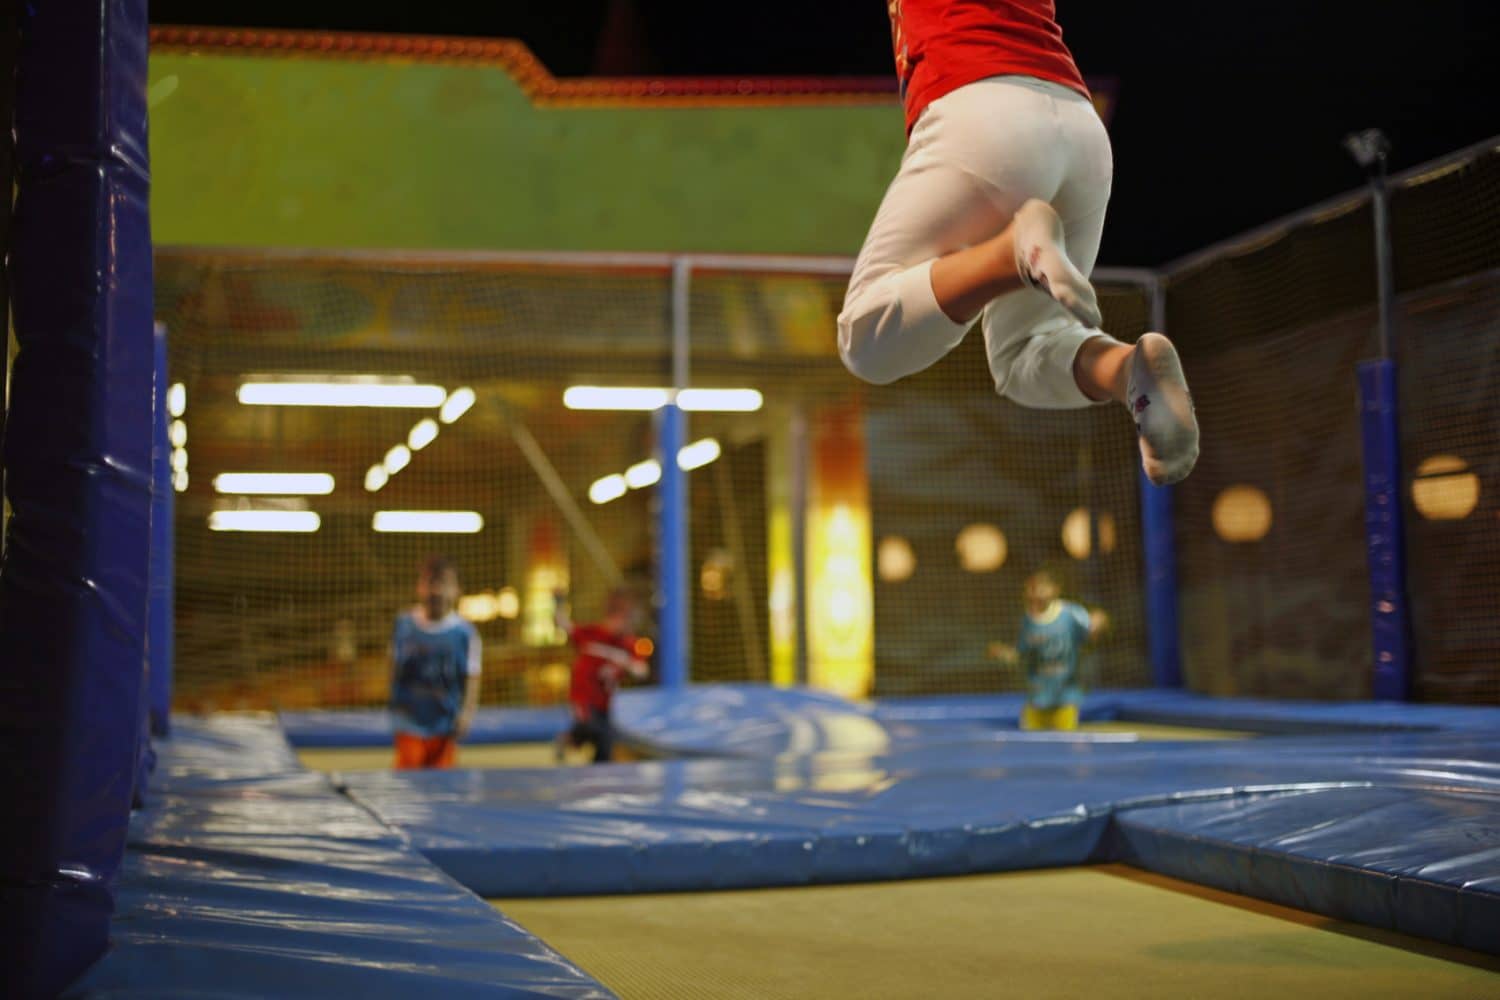 Trampoline Injuries and Safety